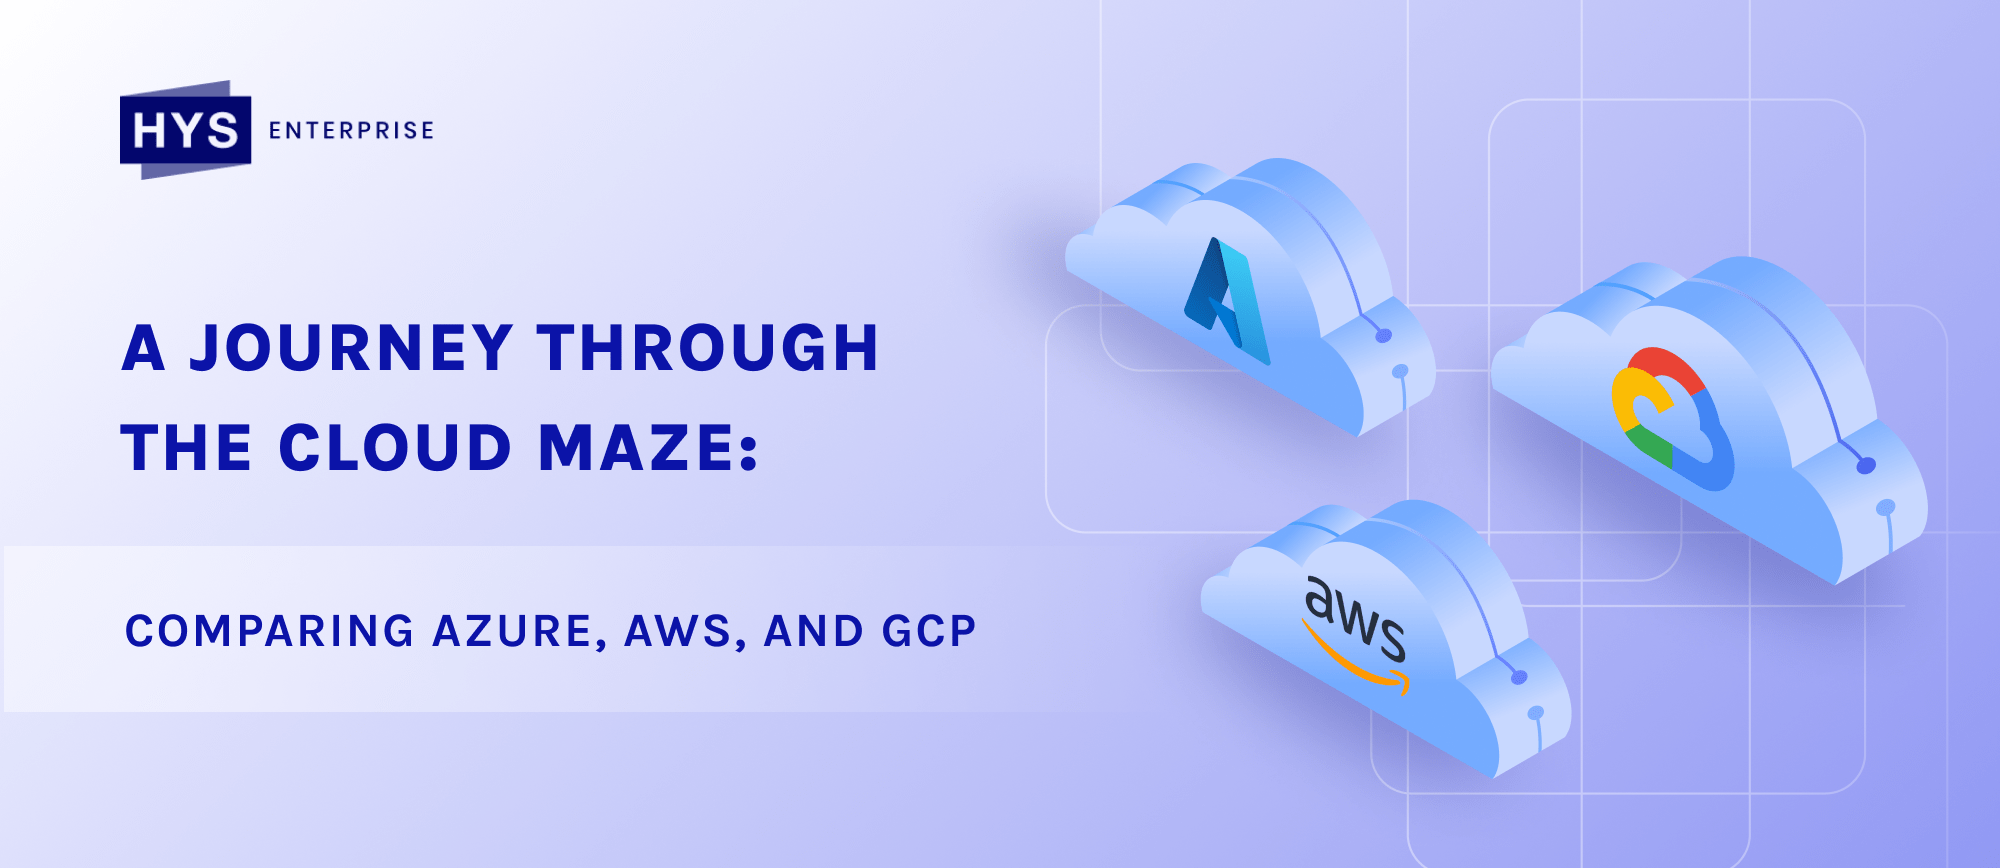 A Journey Through the Cloud Maze: Comparing Azure, AWS, and GCP